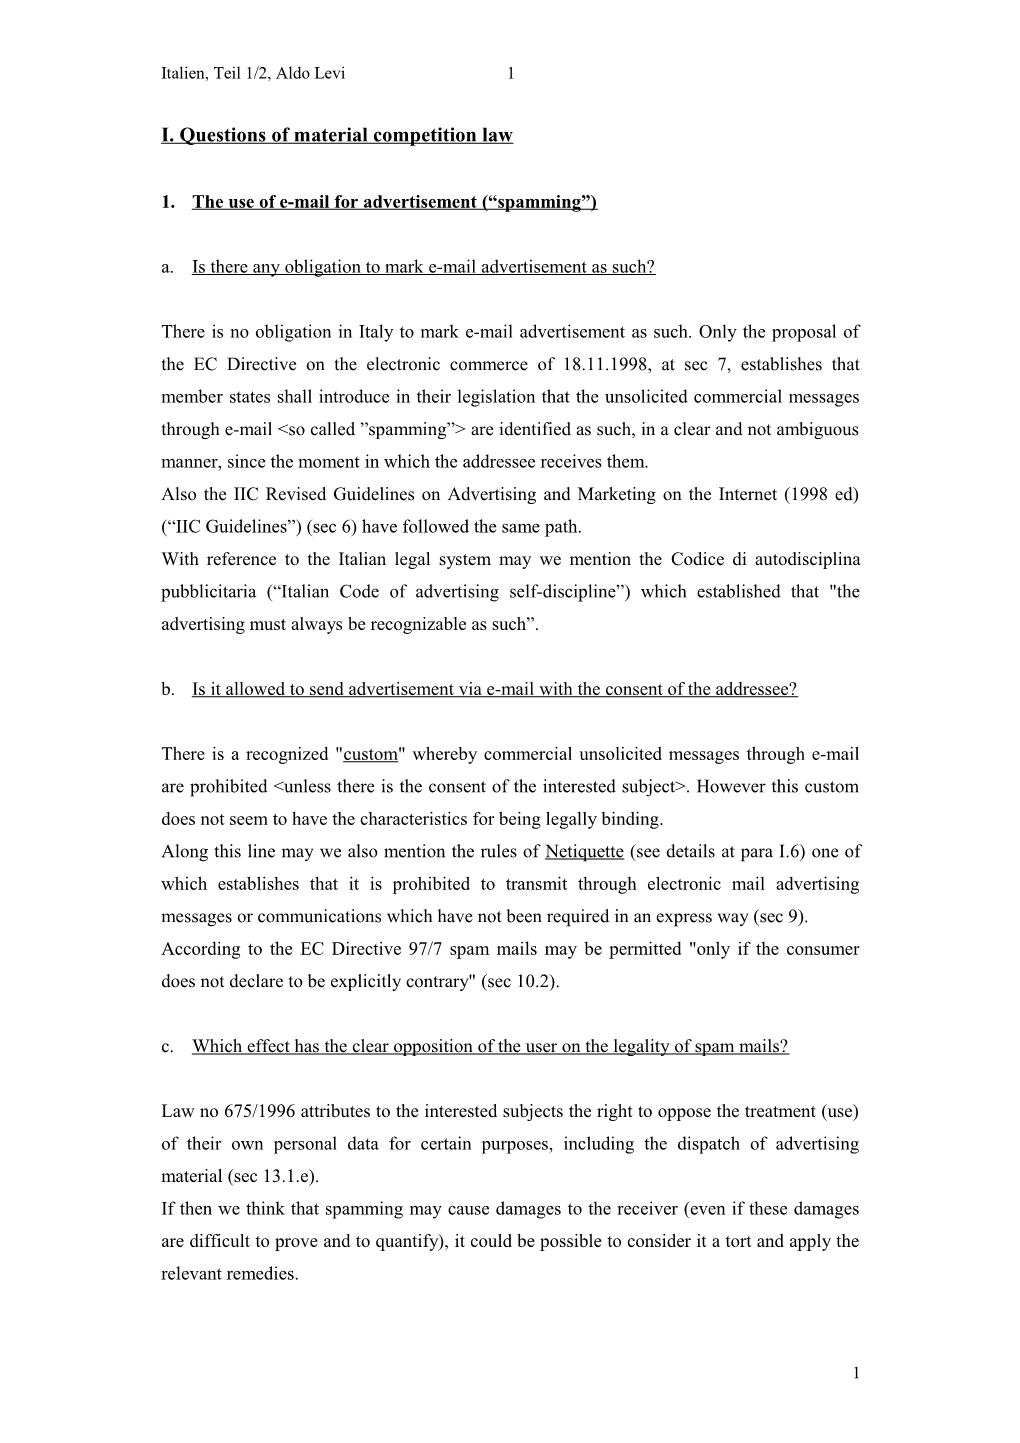 I. Questions of Material Competition Law